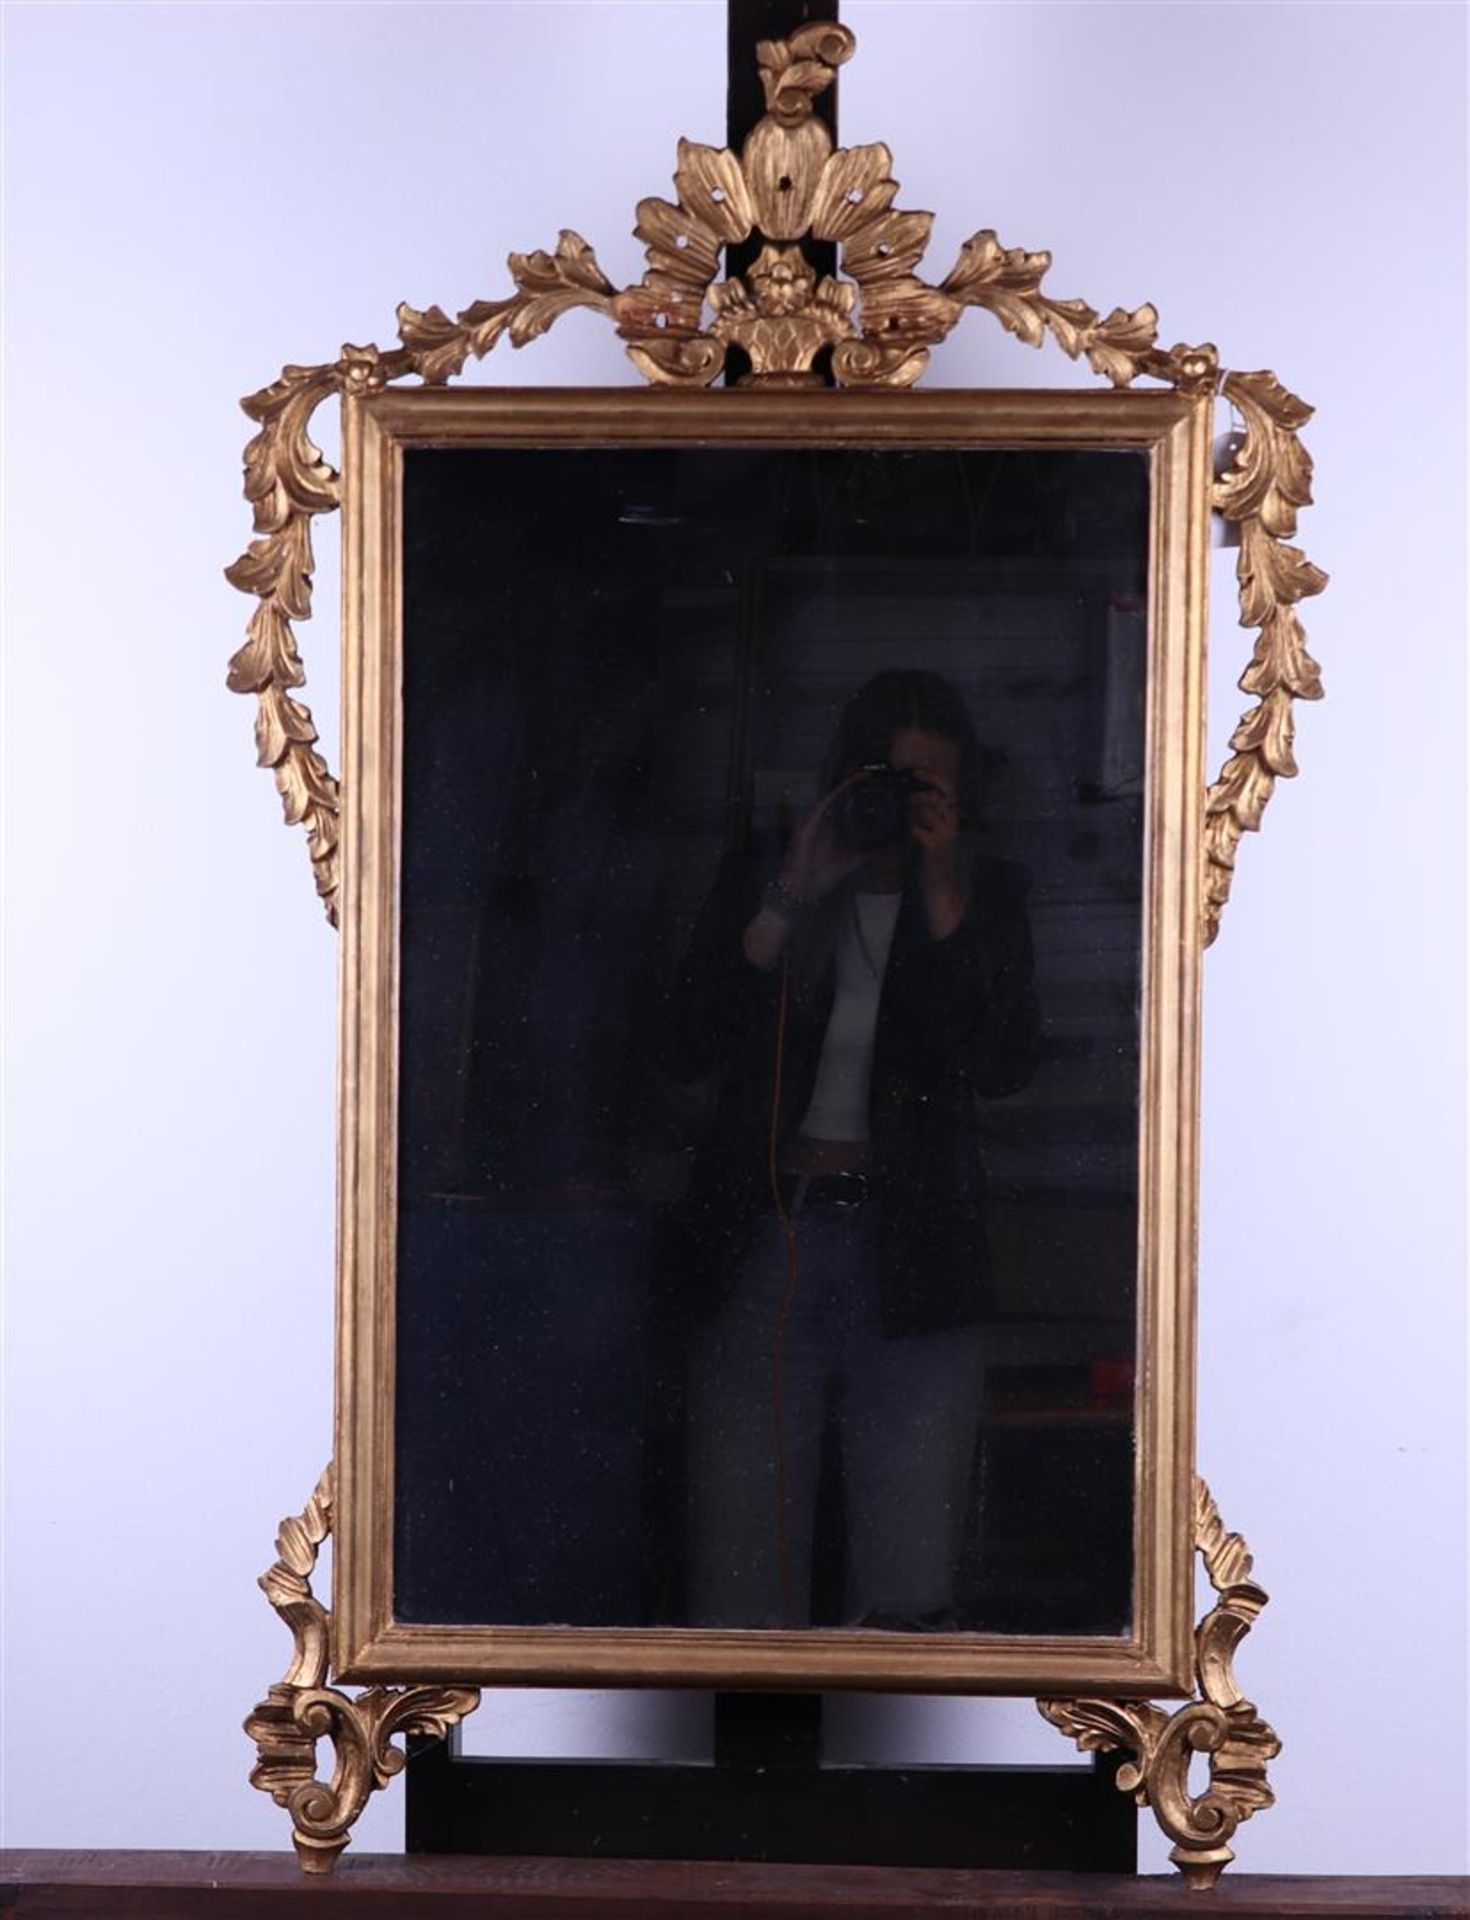 A gilded Louis Seize carved wood and gesso mirror, 18th century. Replace glass. Damage to the top.